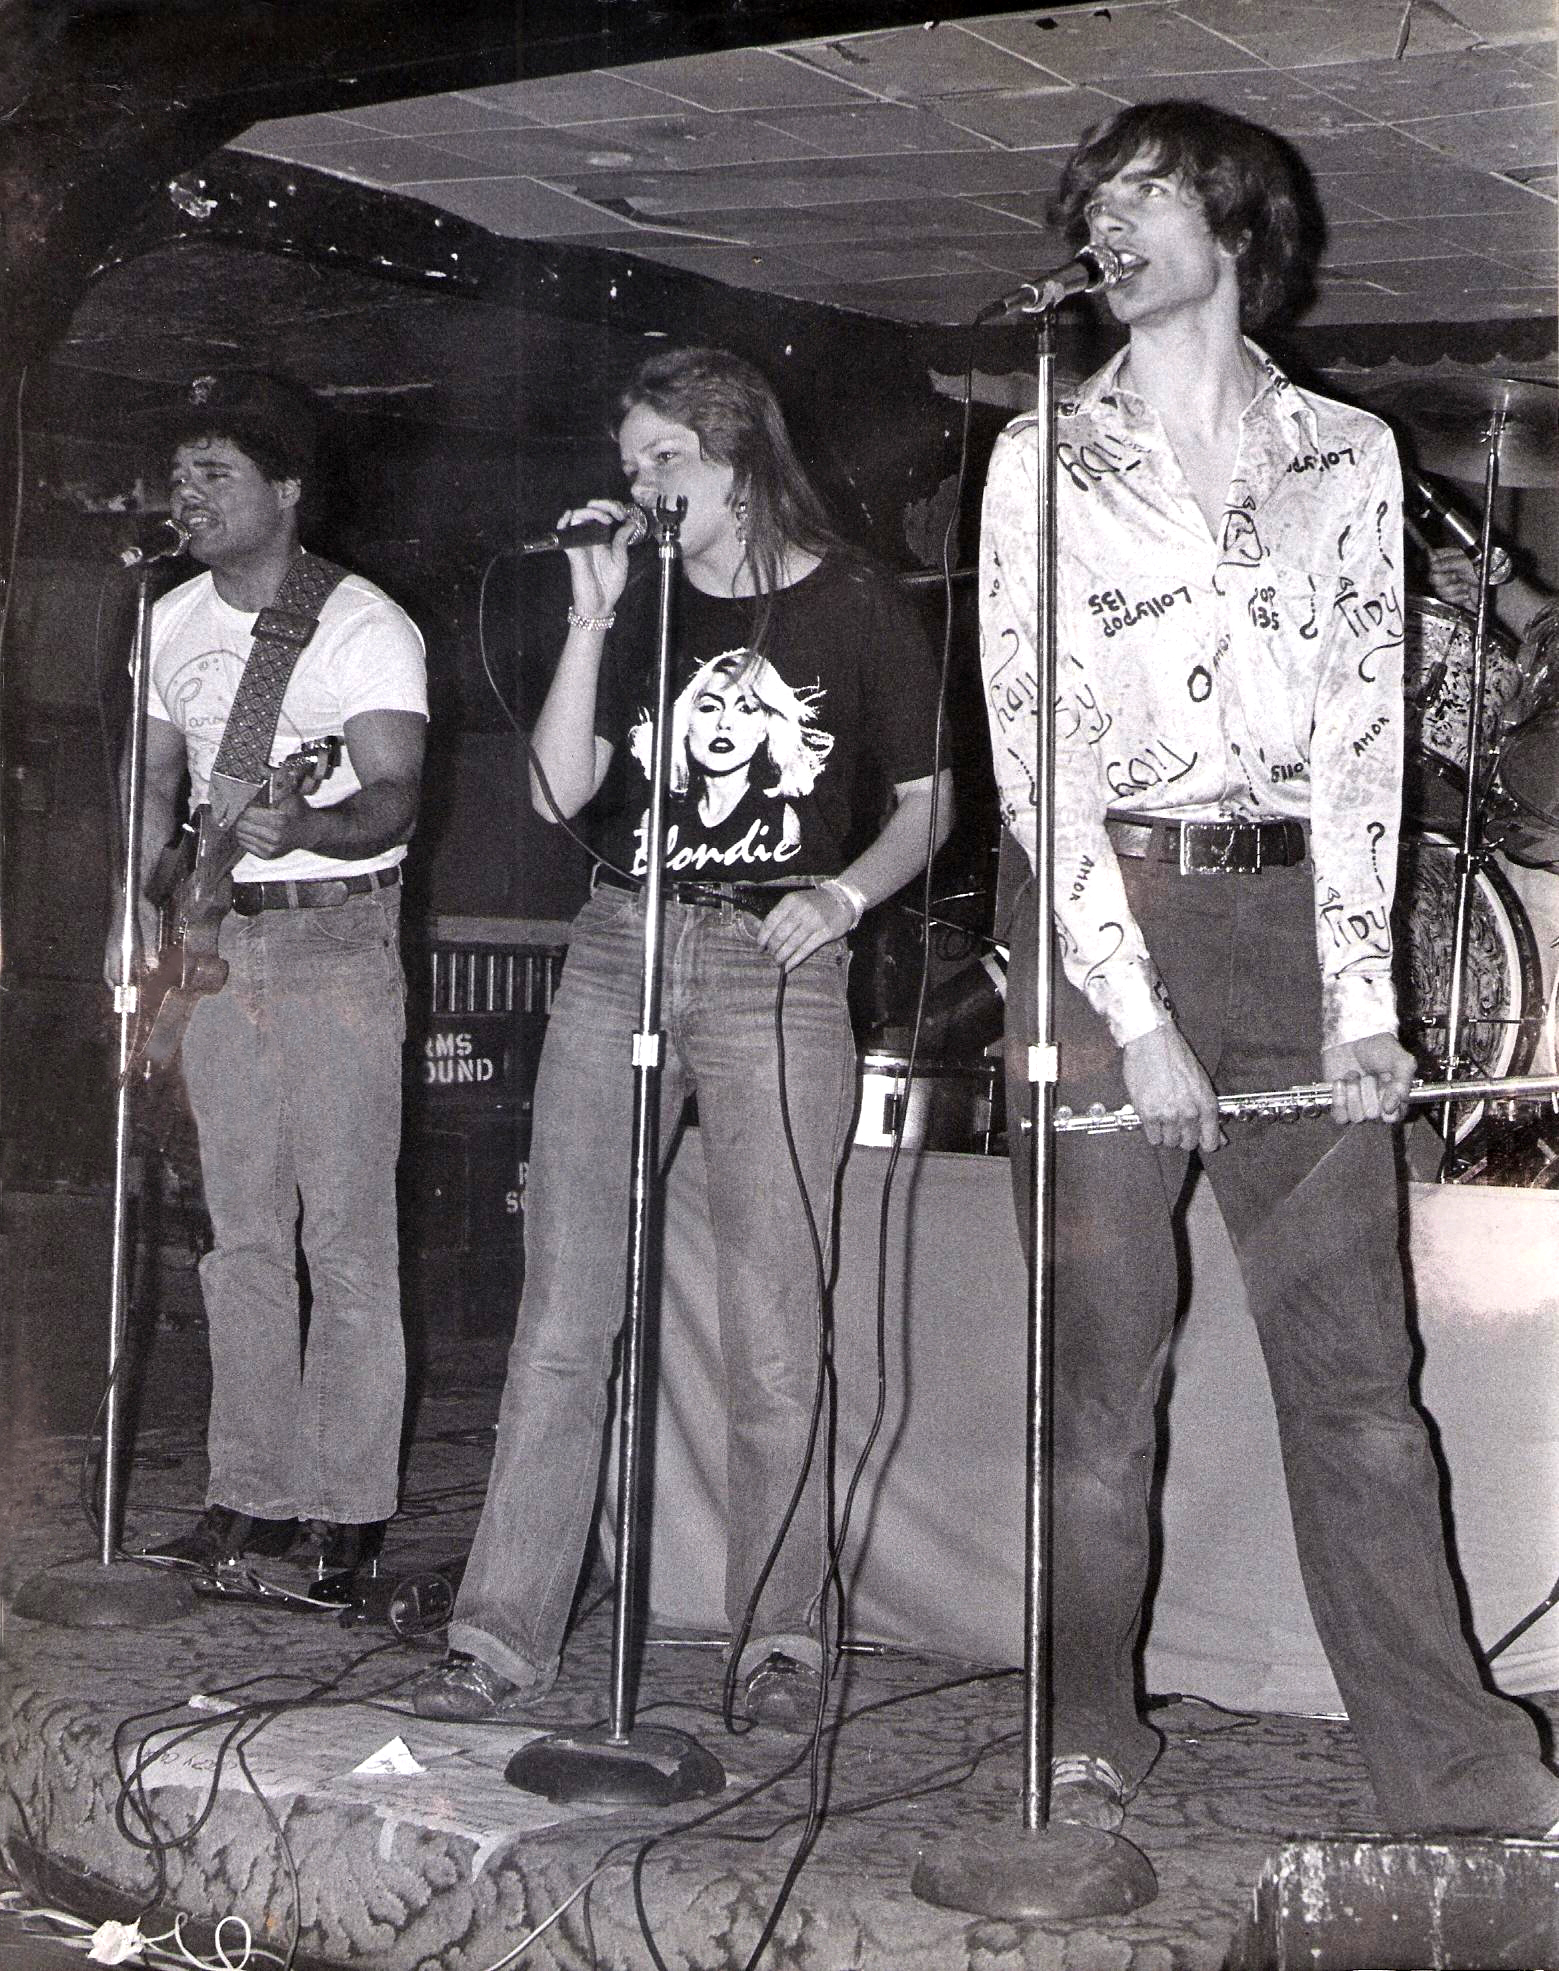 Barry Cannizzaro, Kim Watts, Patt Connolly and Gerry Cannizzaro at McVans 1979